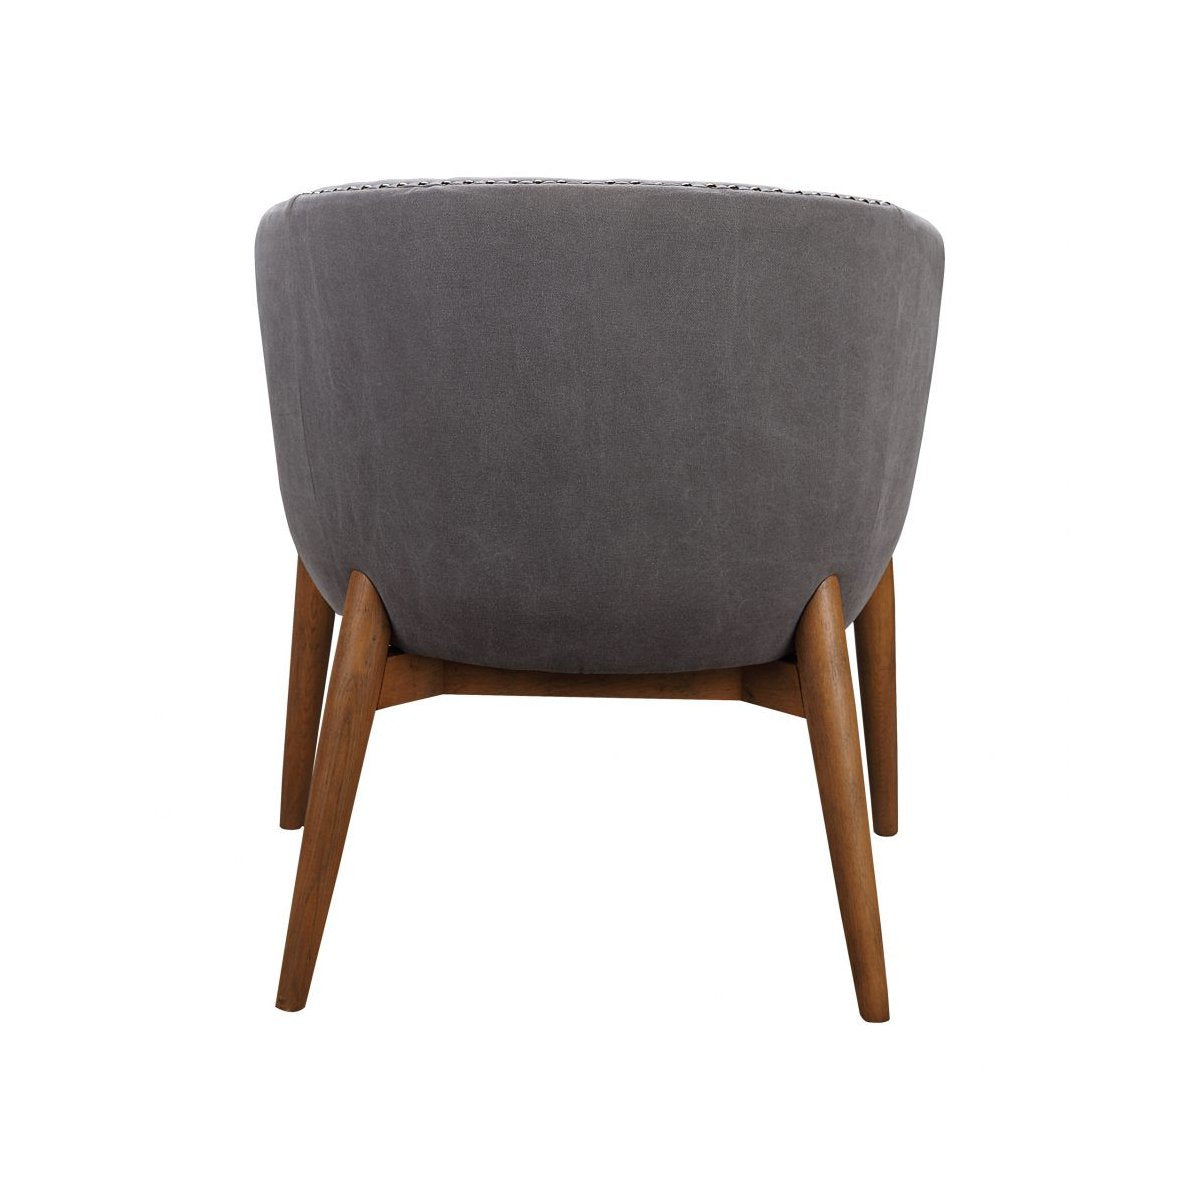 Kismet Tub Chair Grey Occasional Chairs Moe's     Four Hands, Burke Decor, Mid Century Modern Furniture, Old Bones Furniture Company, Old Bones Co, Modern Mid Century, Designer Furniture, https://www.oldbonesco.com/